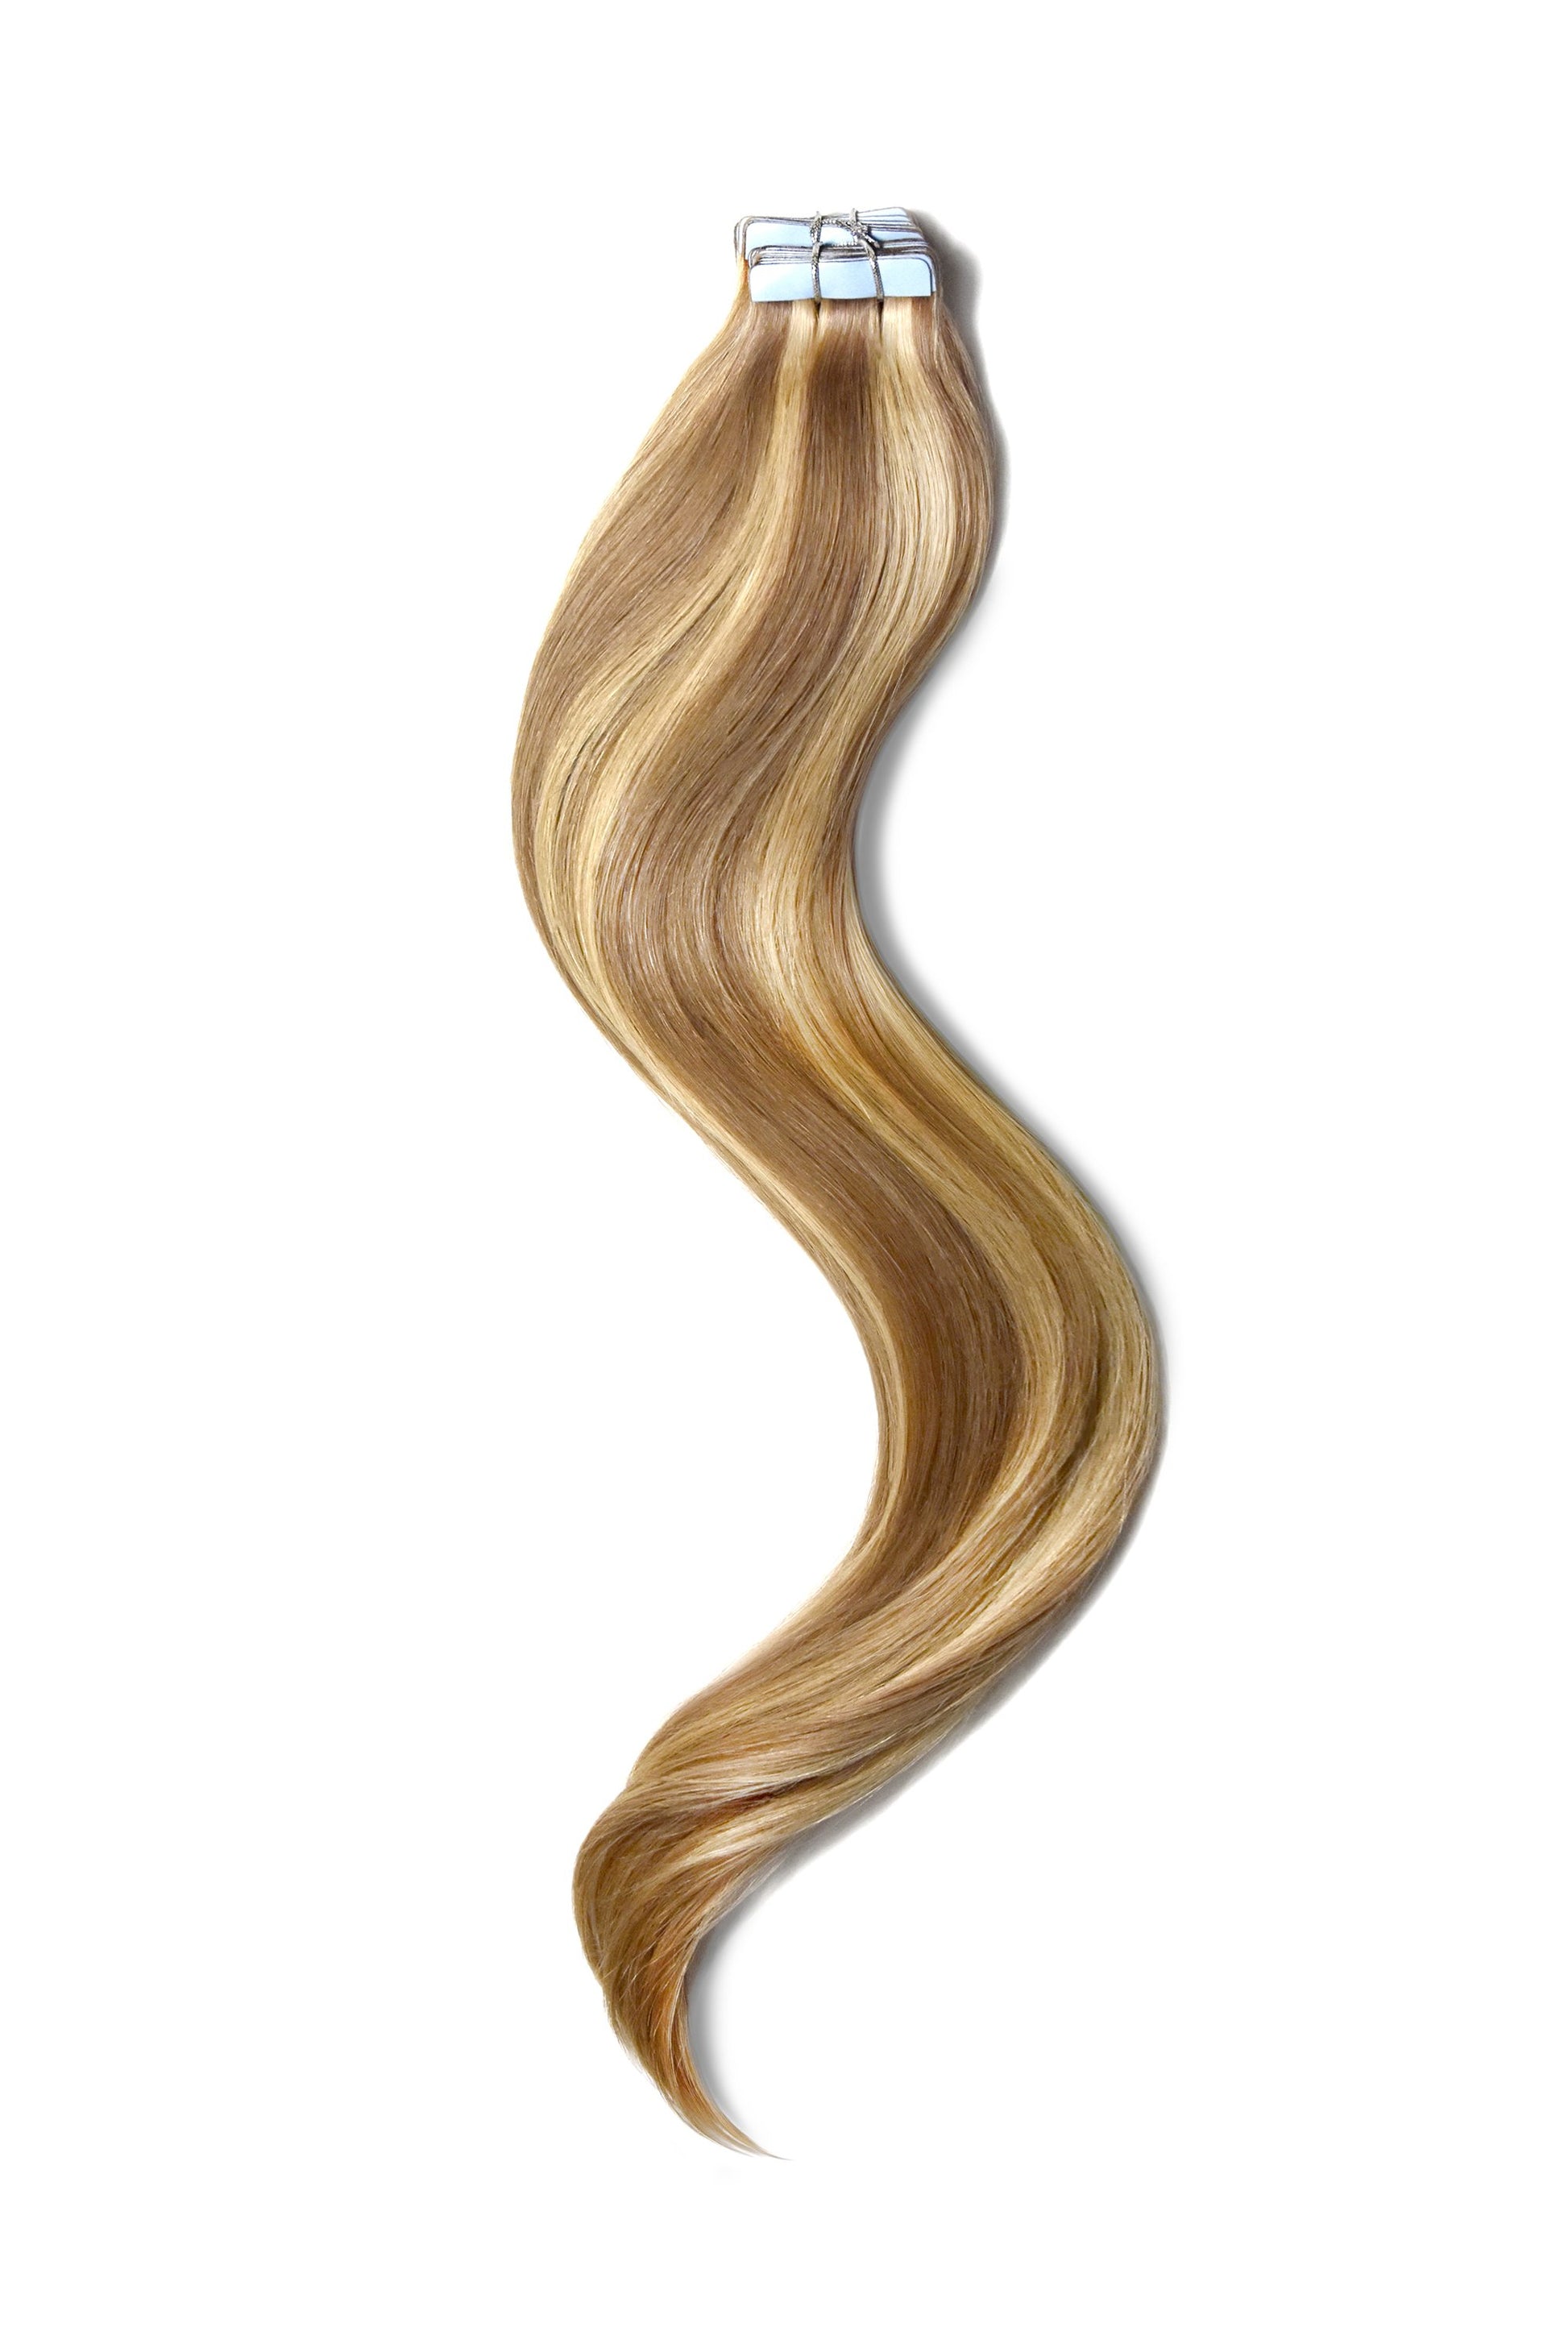 tape-in-hair-extensions-honey-blonde-golden-highlights-shade-10-16